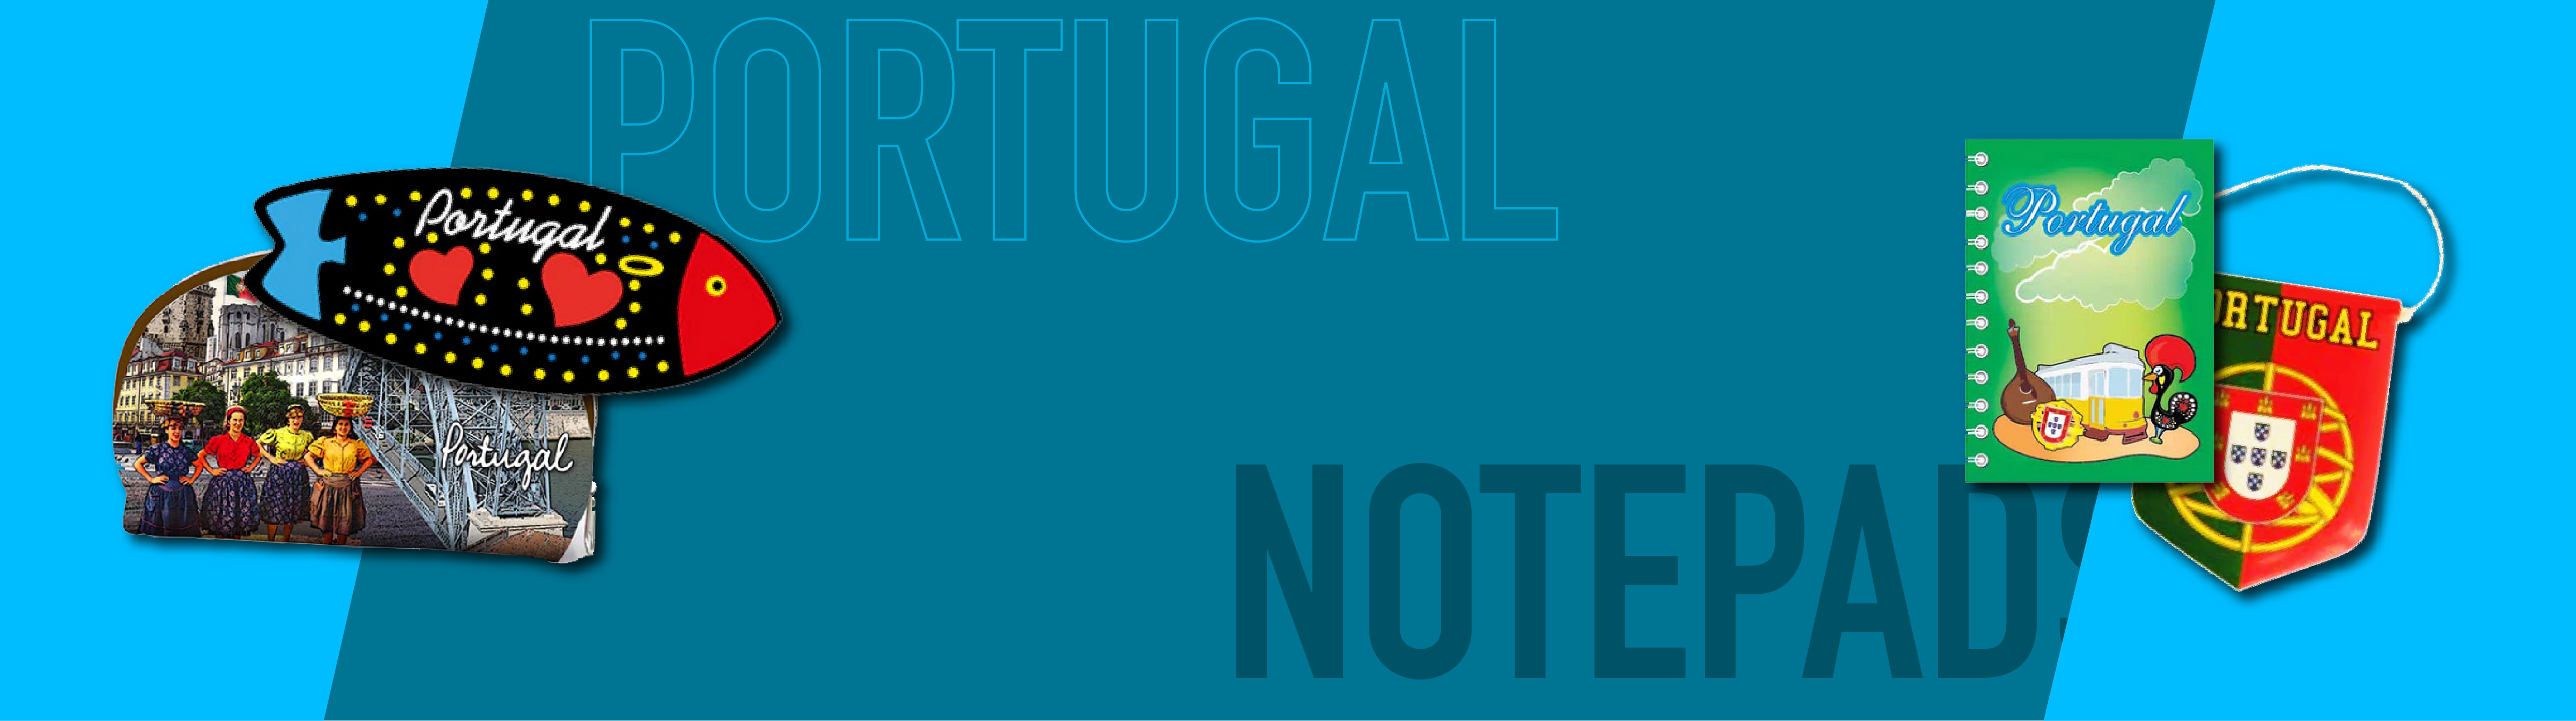 PORTUGAL - NOTEPADS